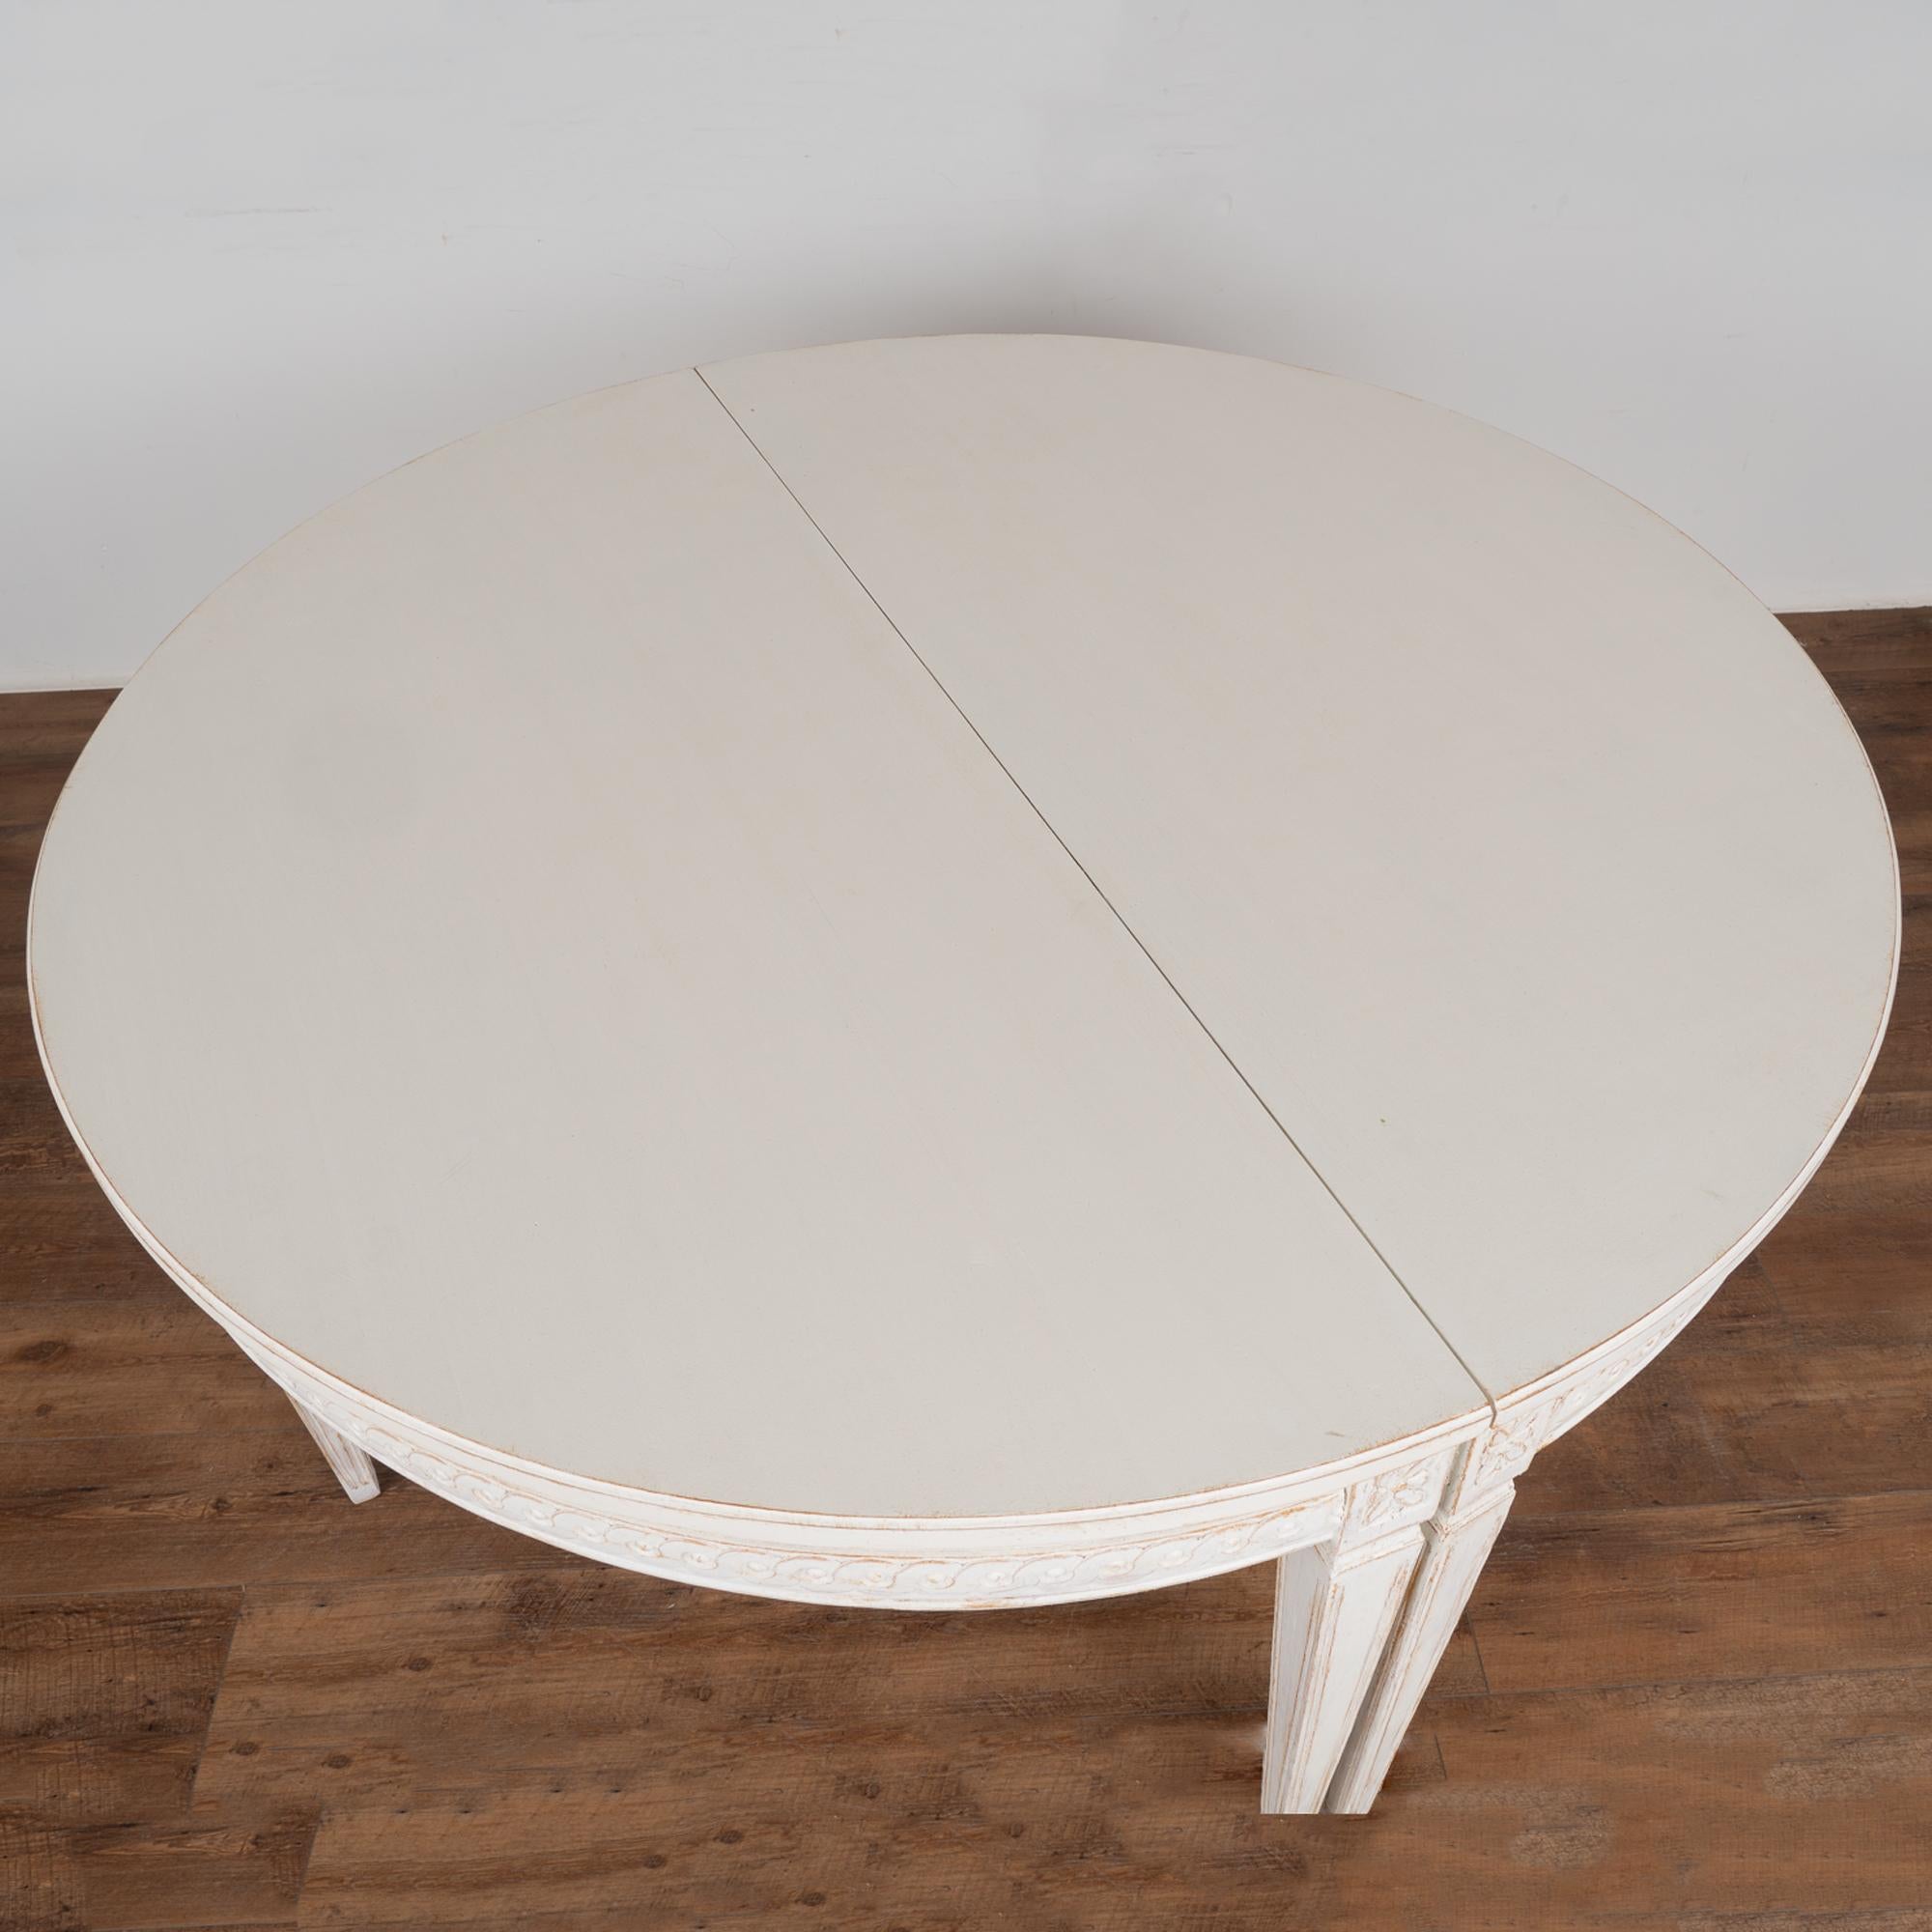 White Oval Dining Table With Three Leaves, Sweden circa 1860-80 In Good Condition For Sale In Round Top, TX